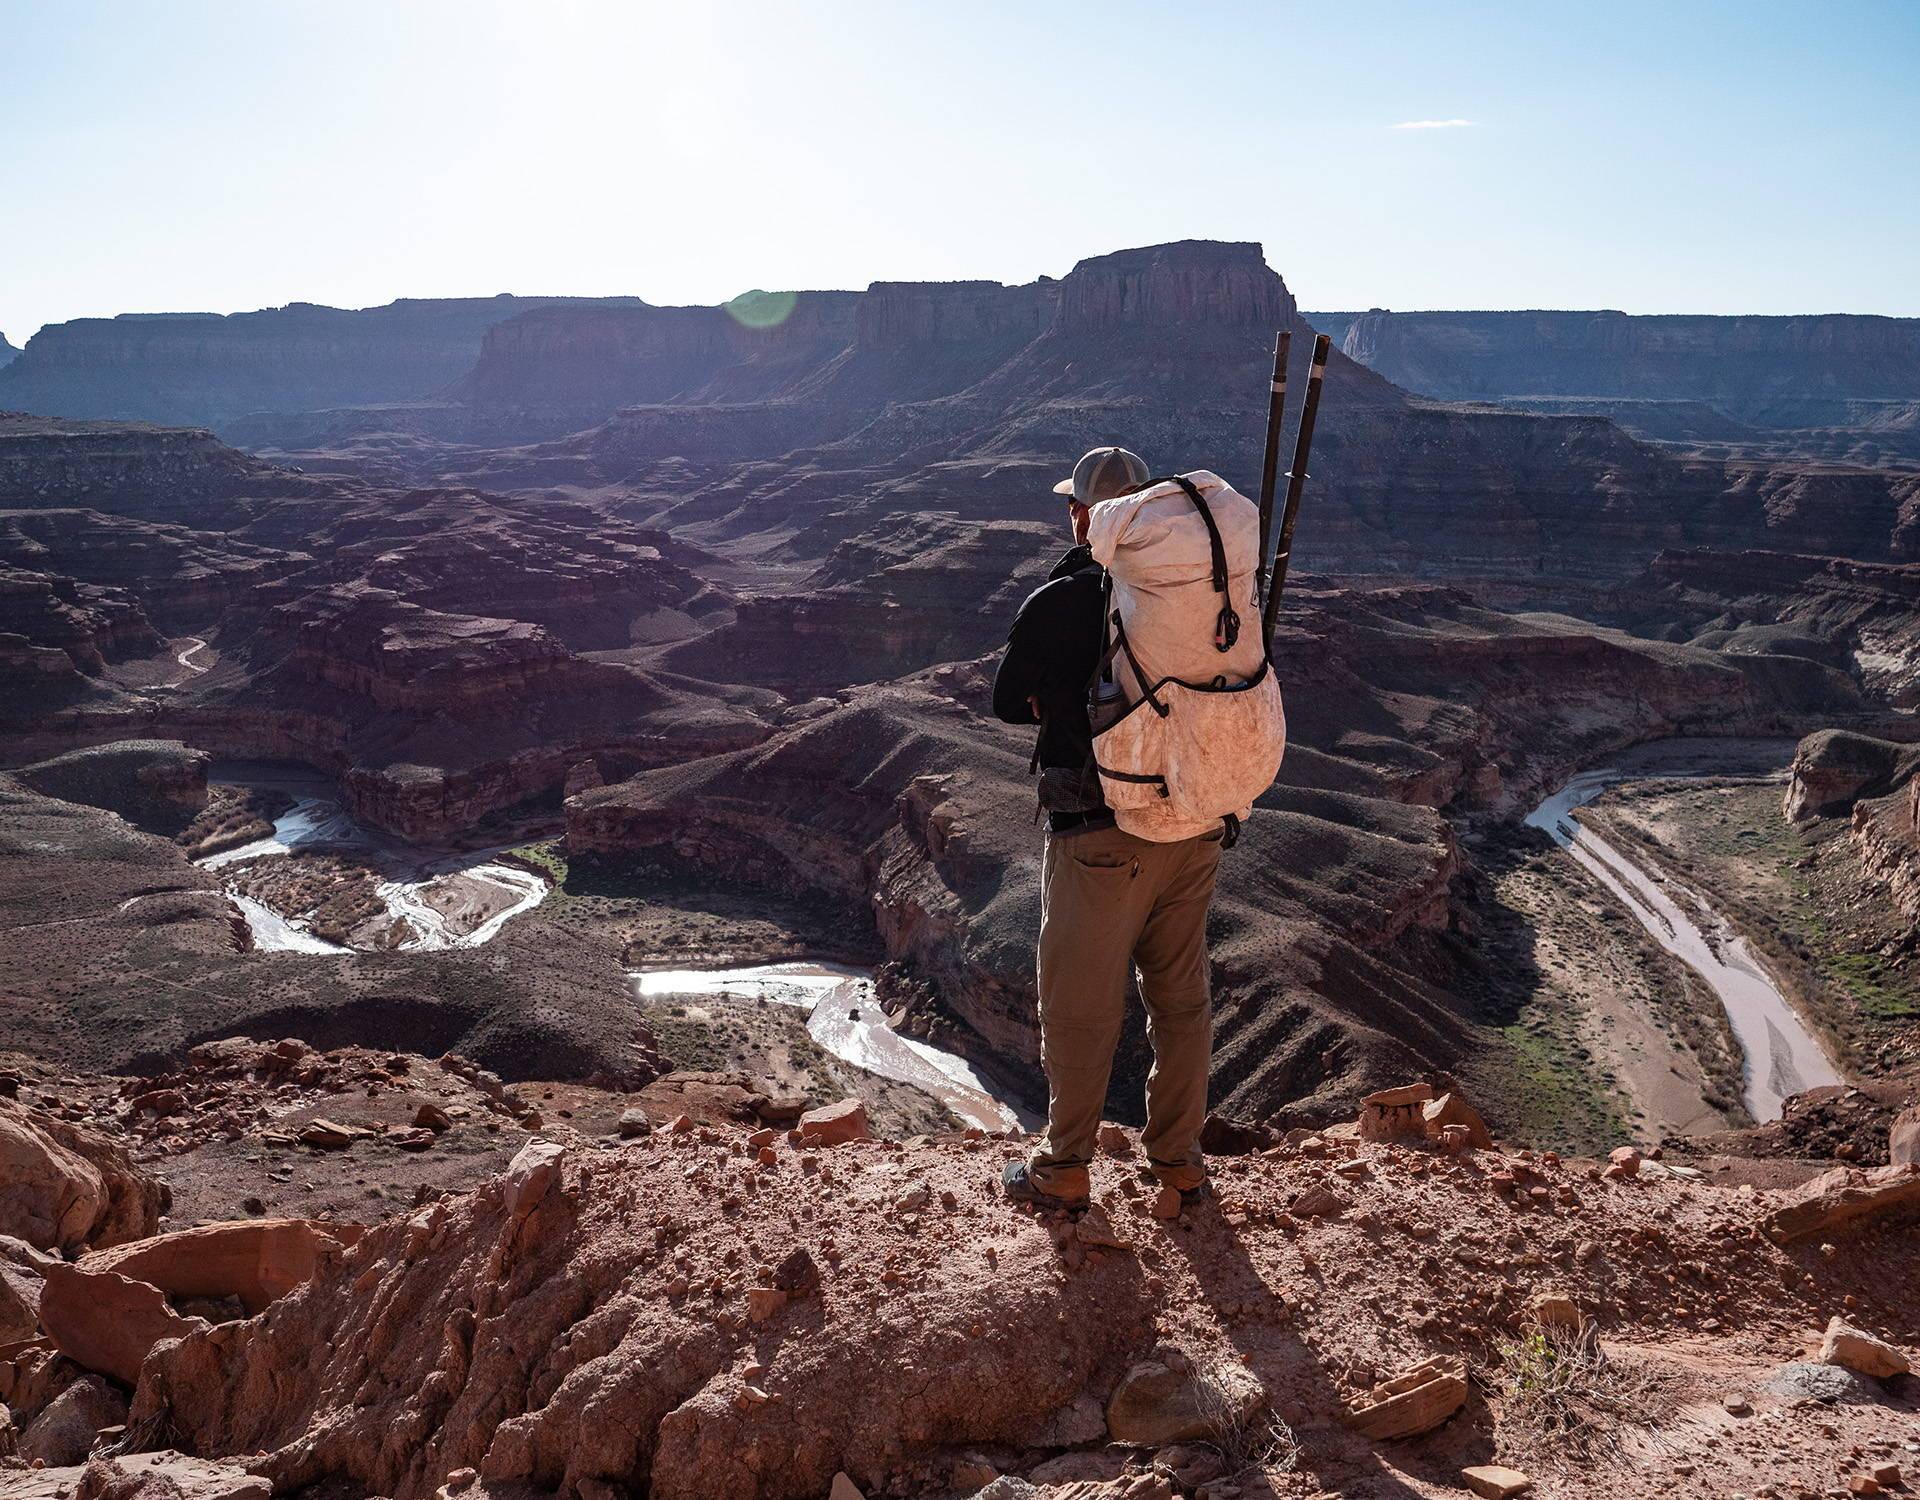 A man standing on a cliff overlooking a canyon.